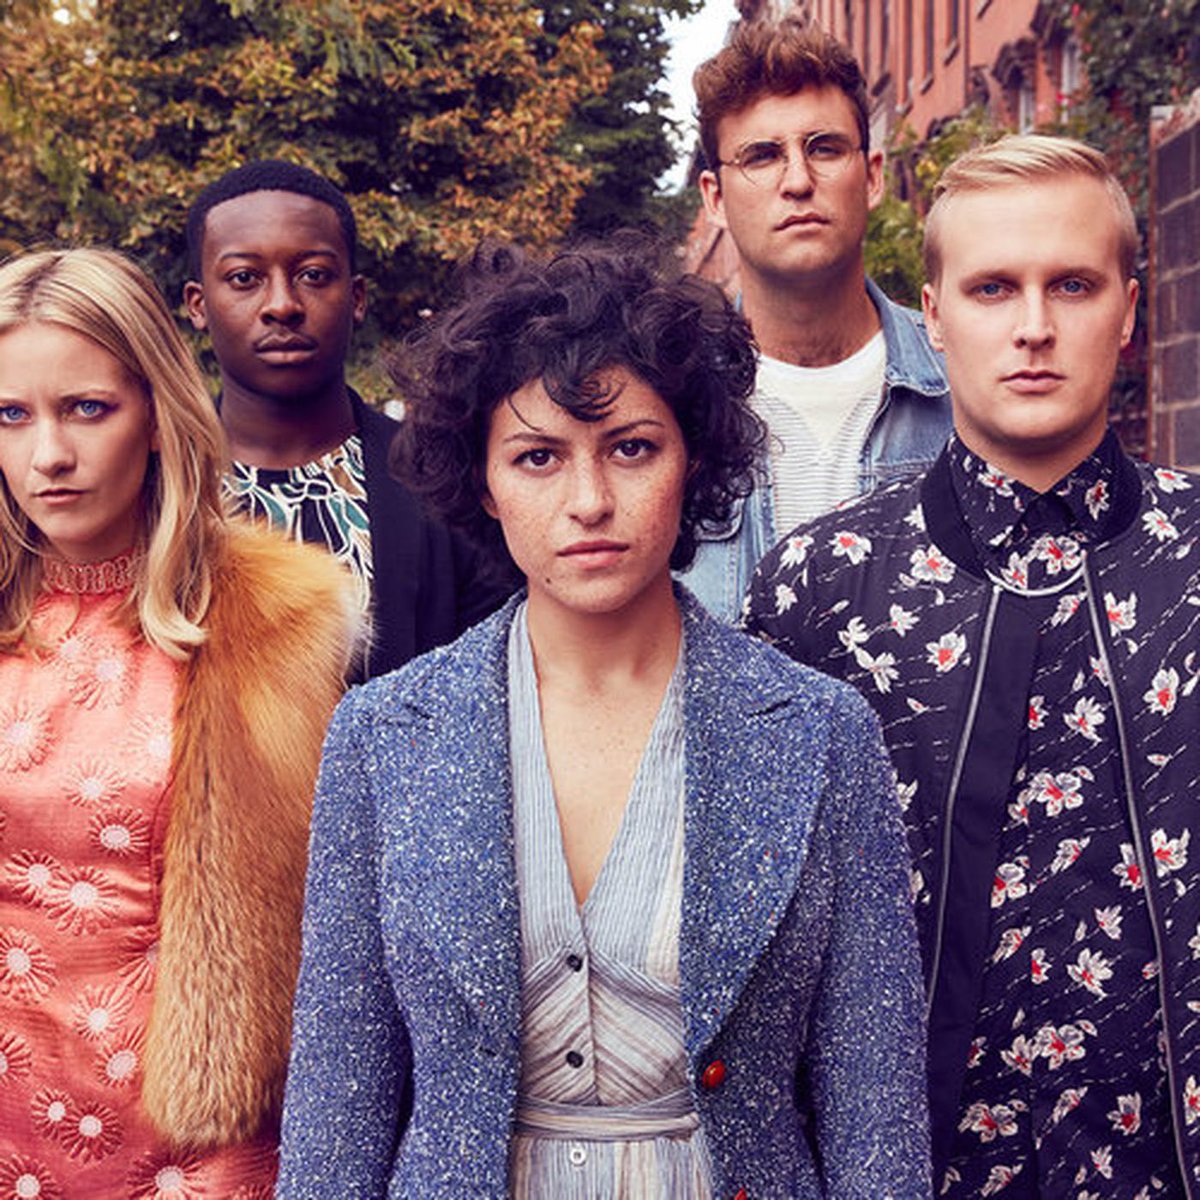 New blog alert. This show is insane but it’s impossible to look away. I’m not really watching, more rubbernecking:

bit.ly/3JRAtGh

#SearchParty